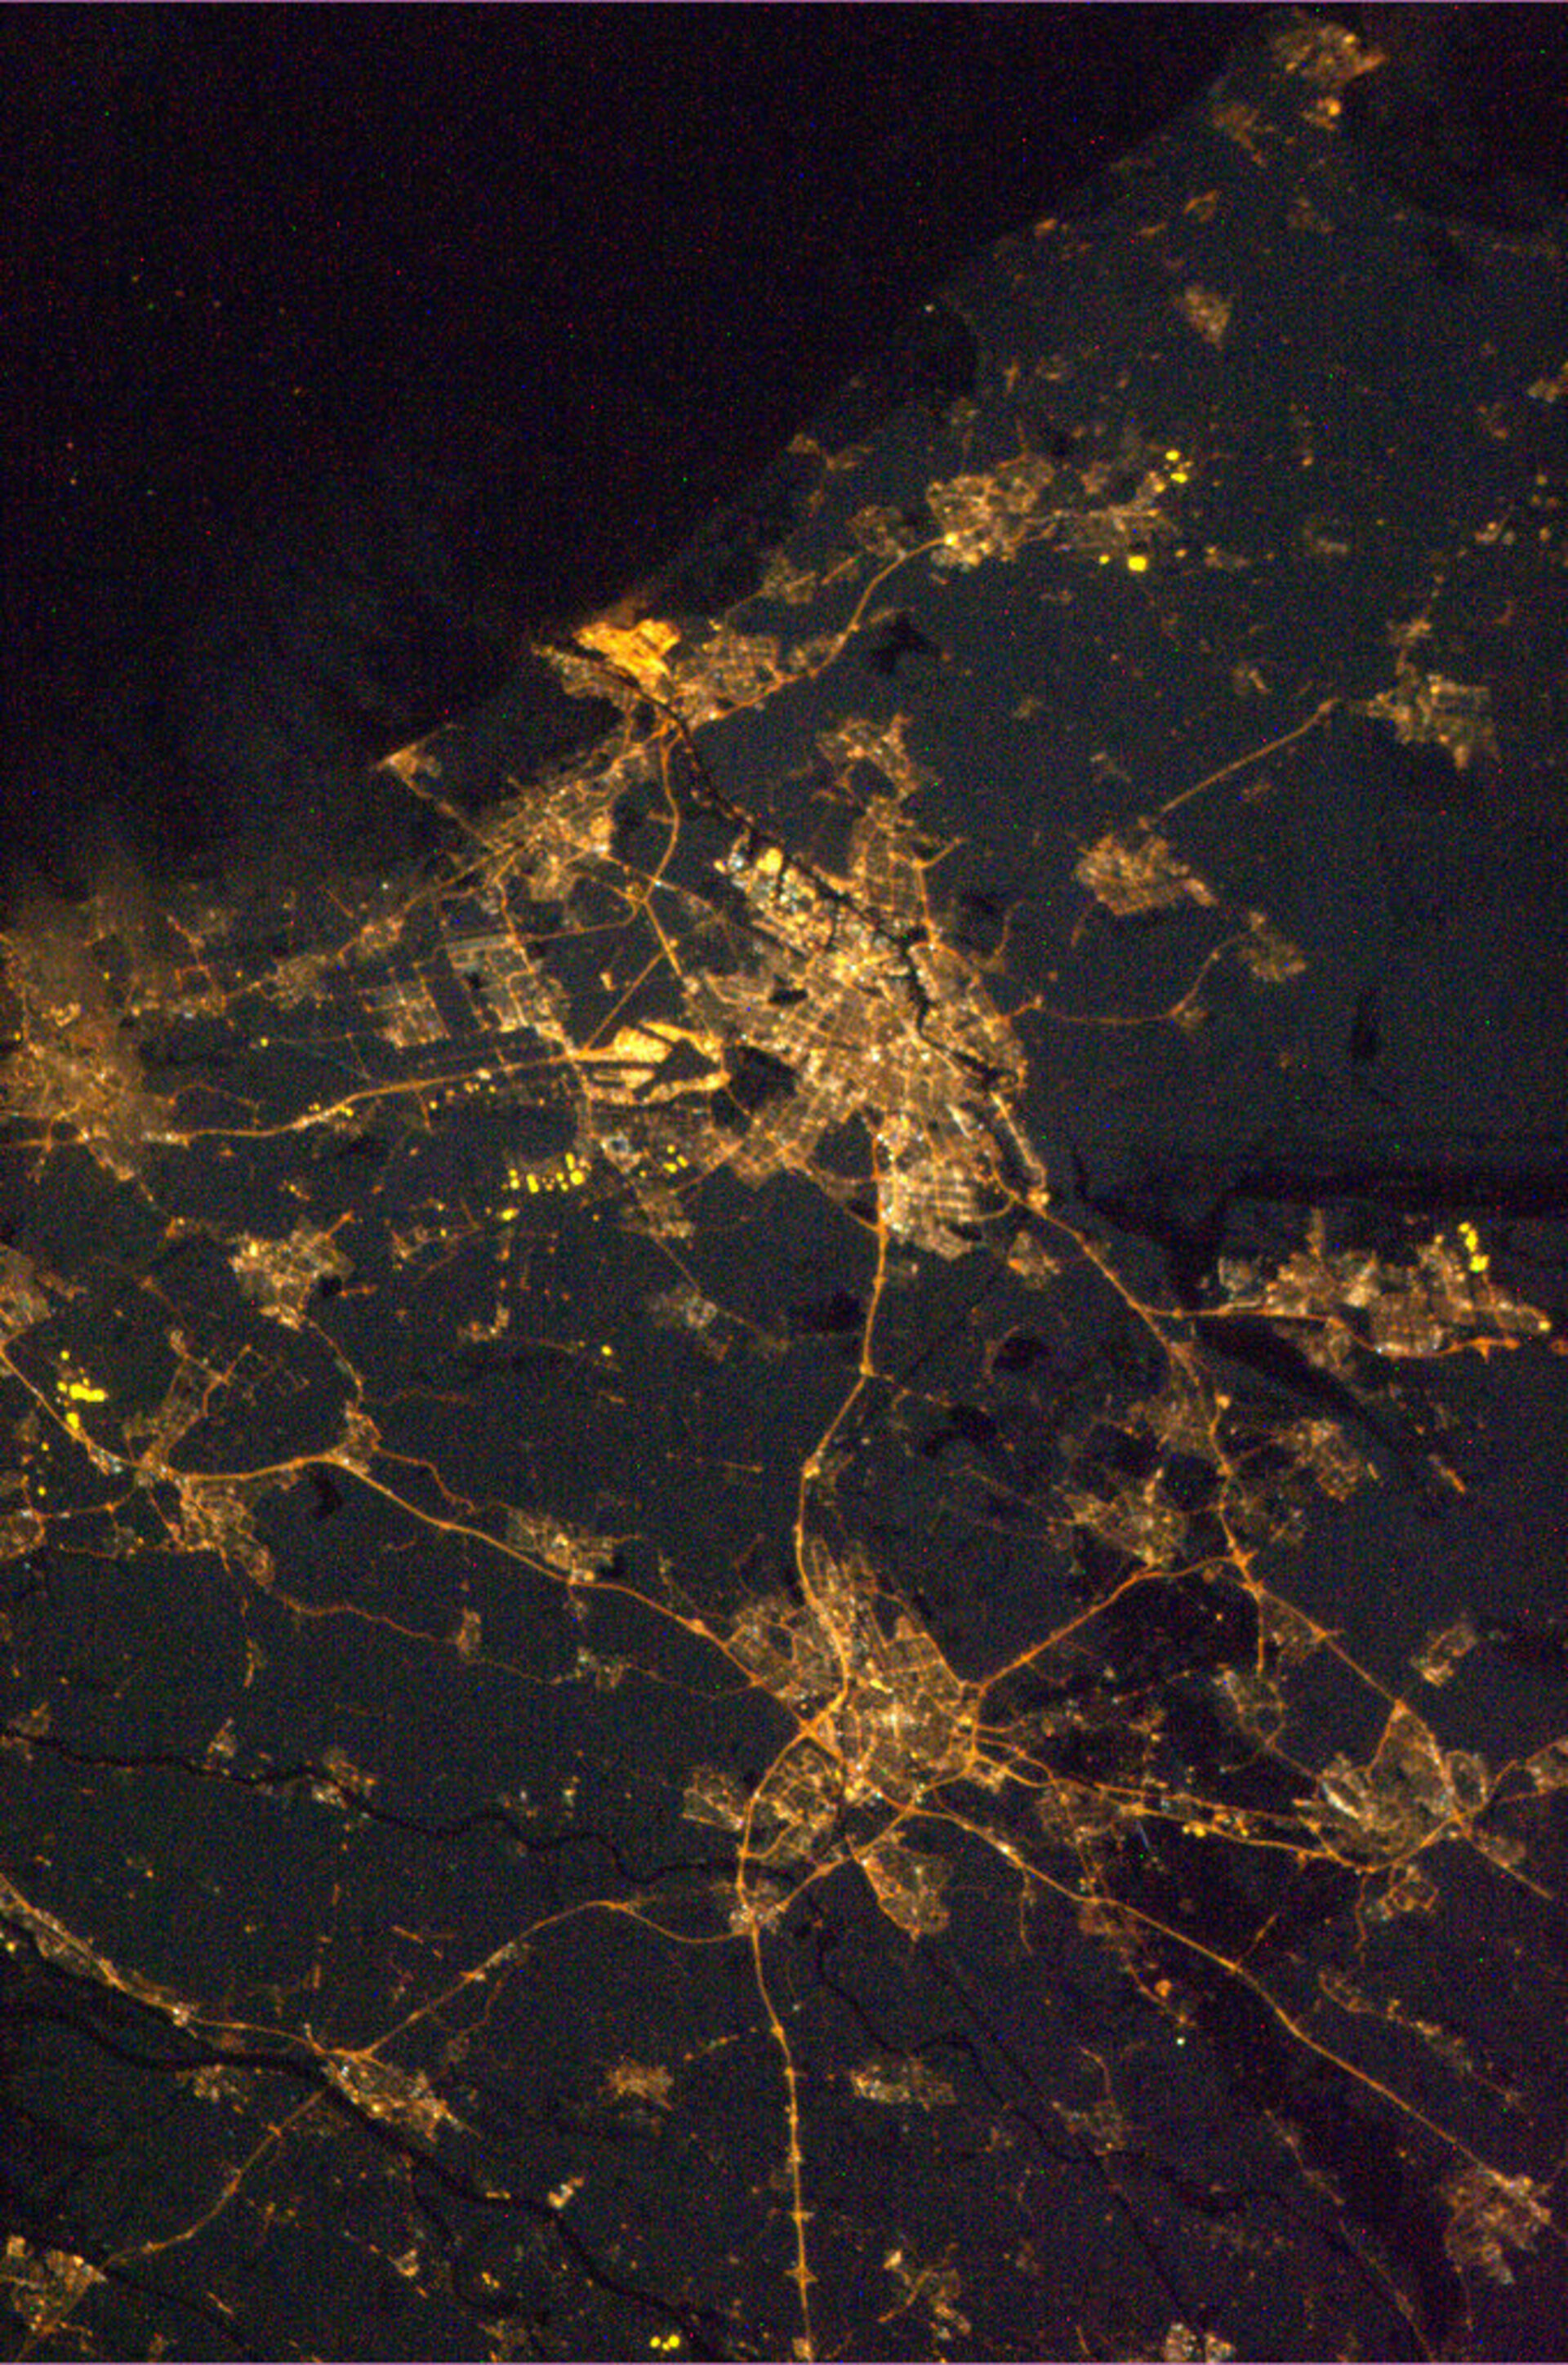 Holland under snow, as seen from the ISS